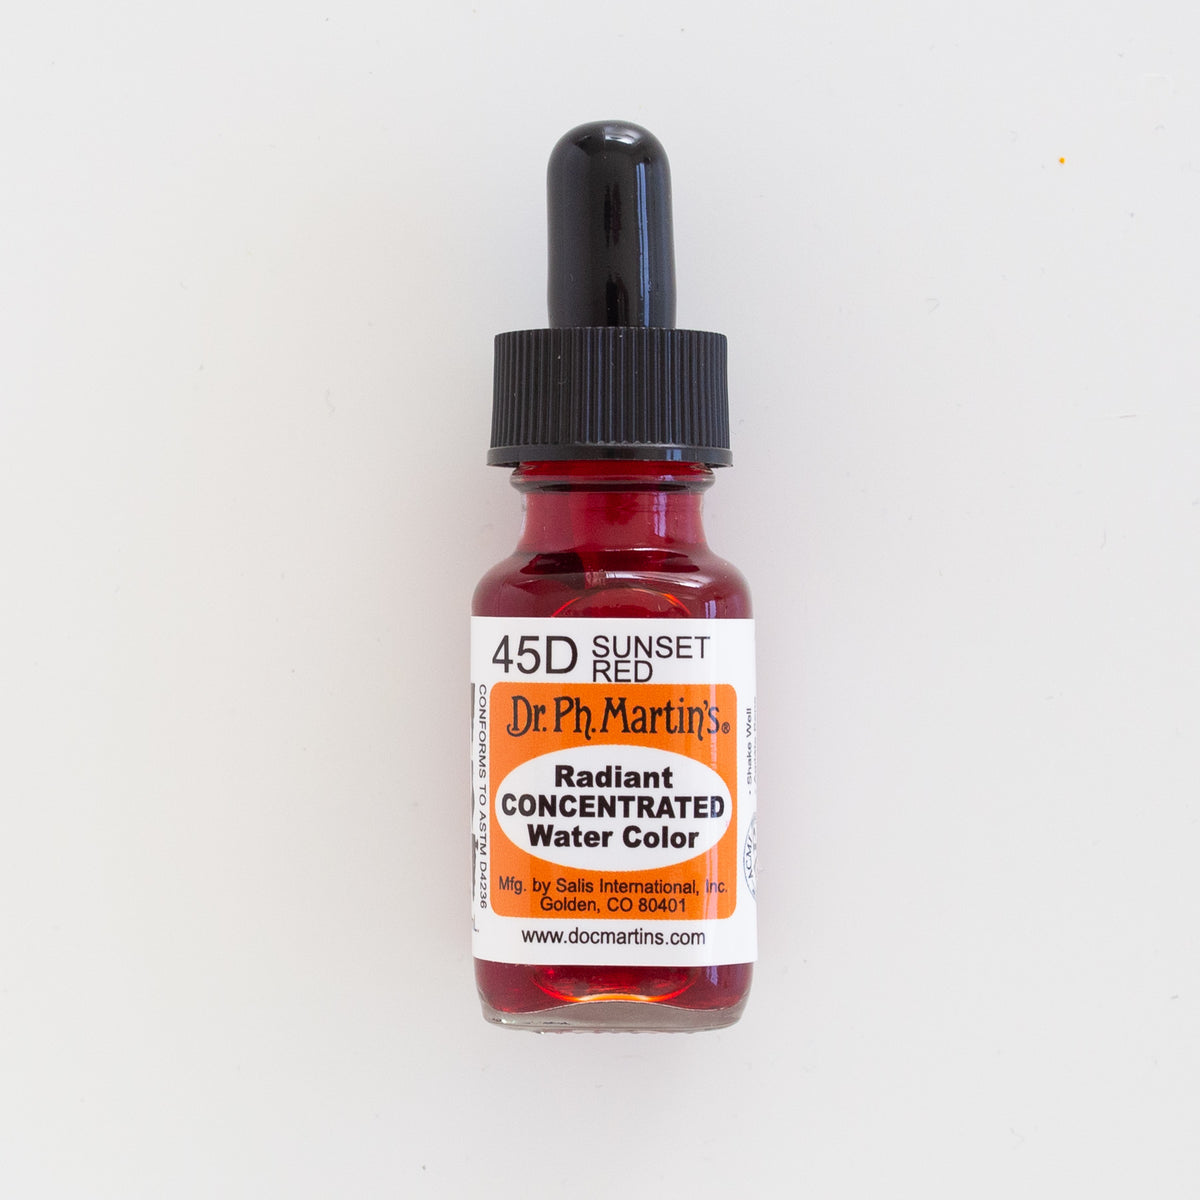 Dr. Ph. Martin’s Radiant Concentrated 45D Sunset Red